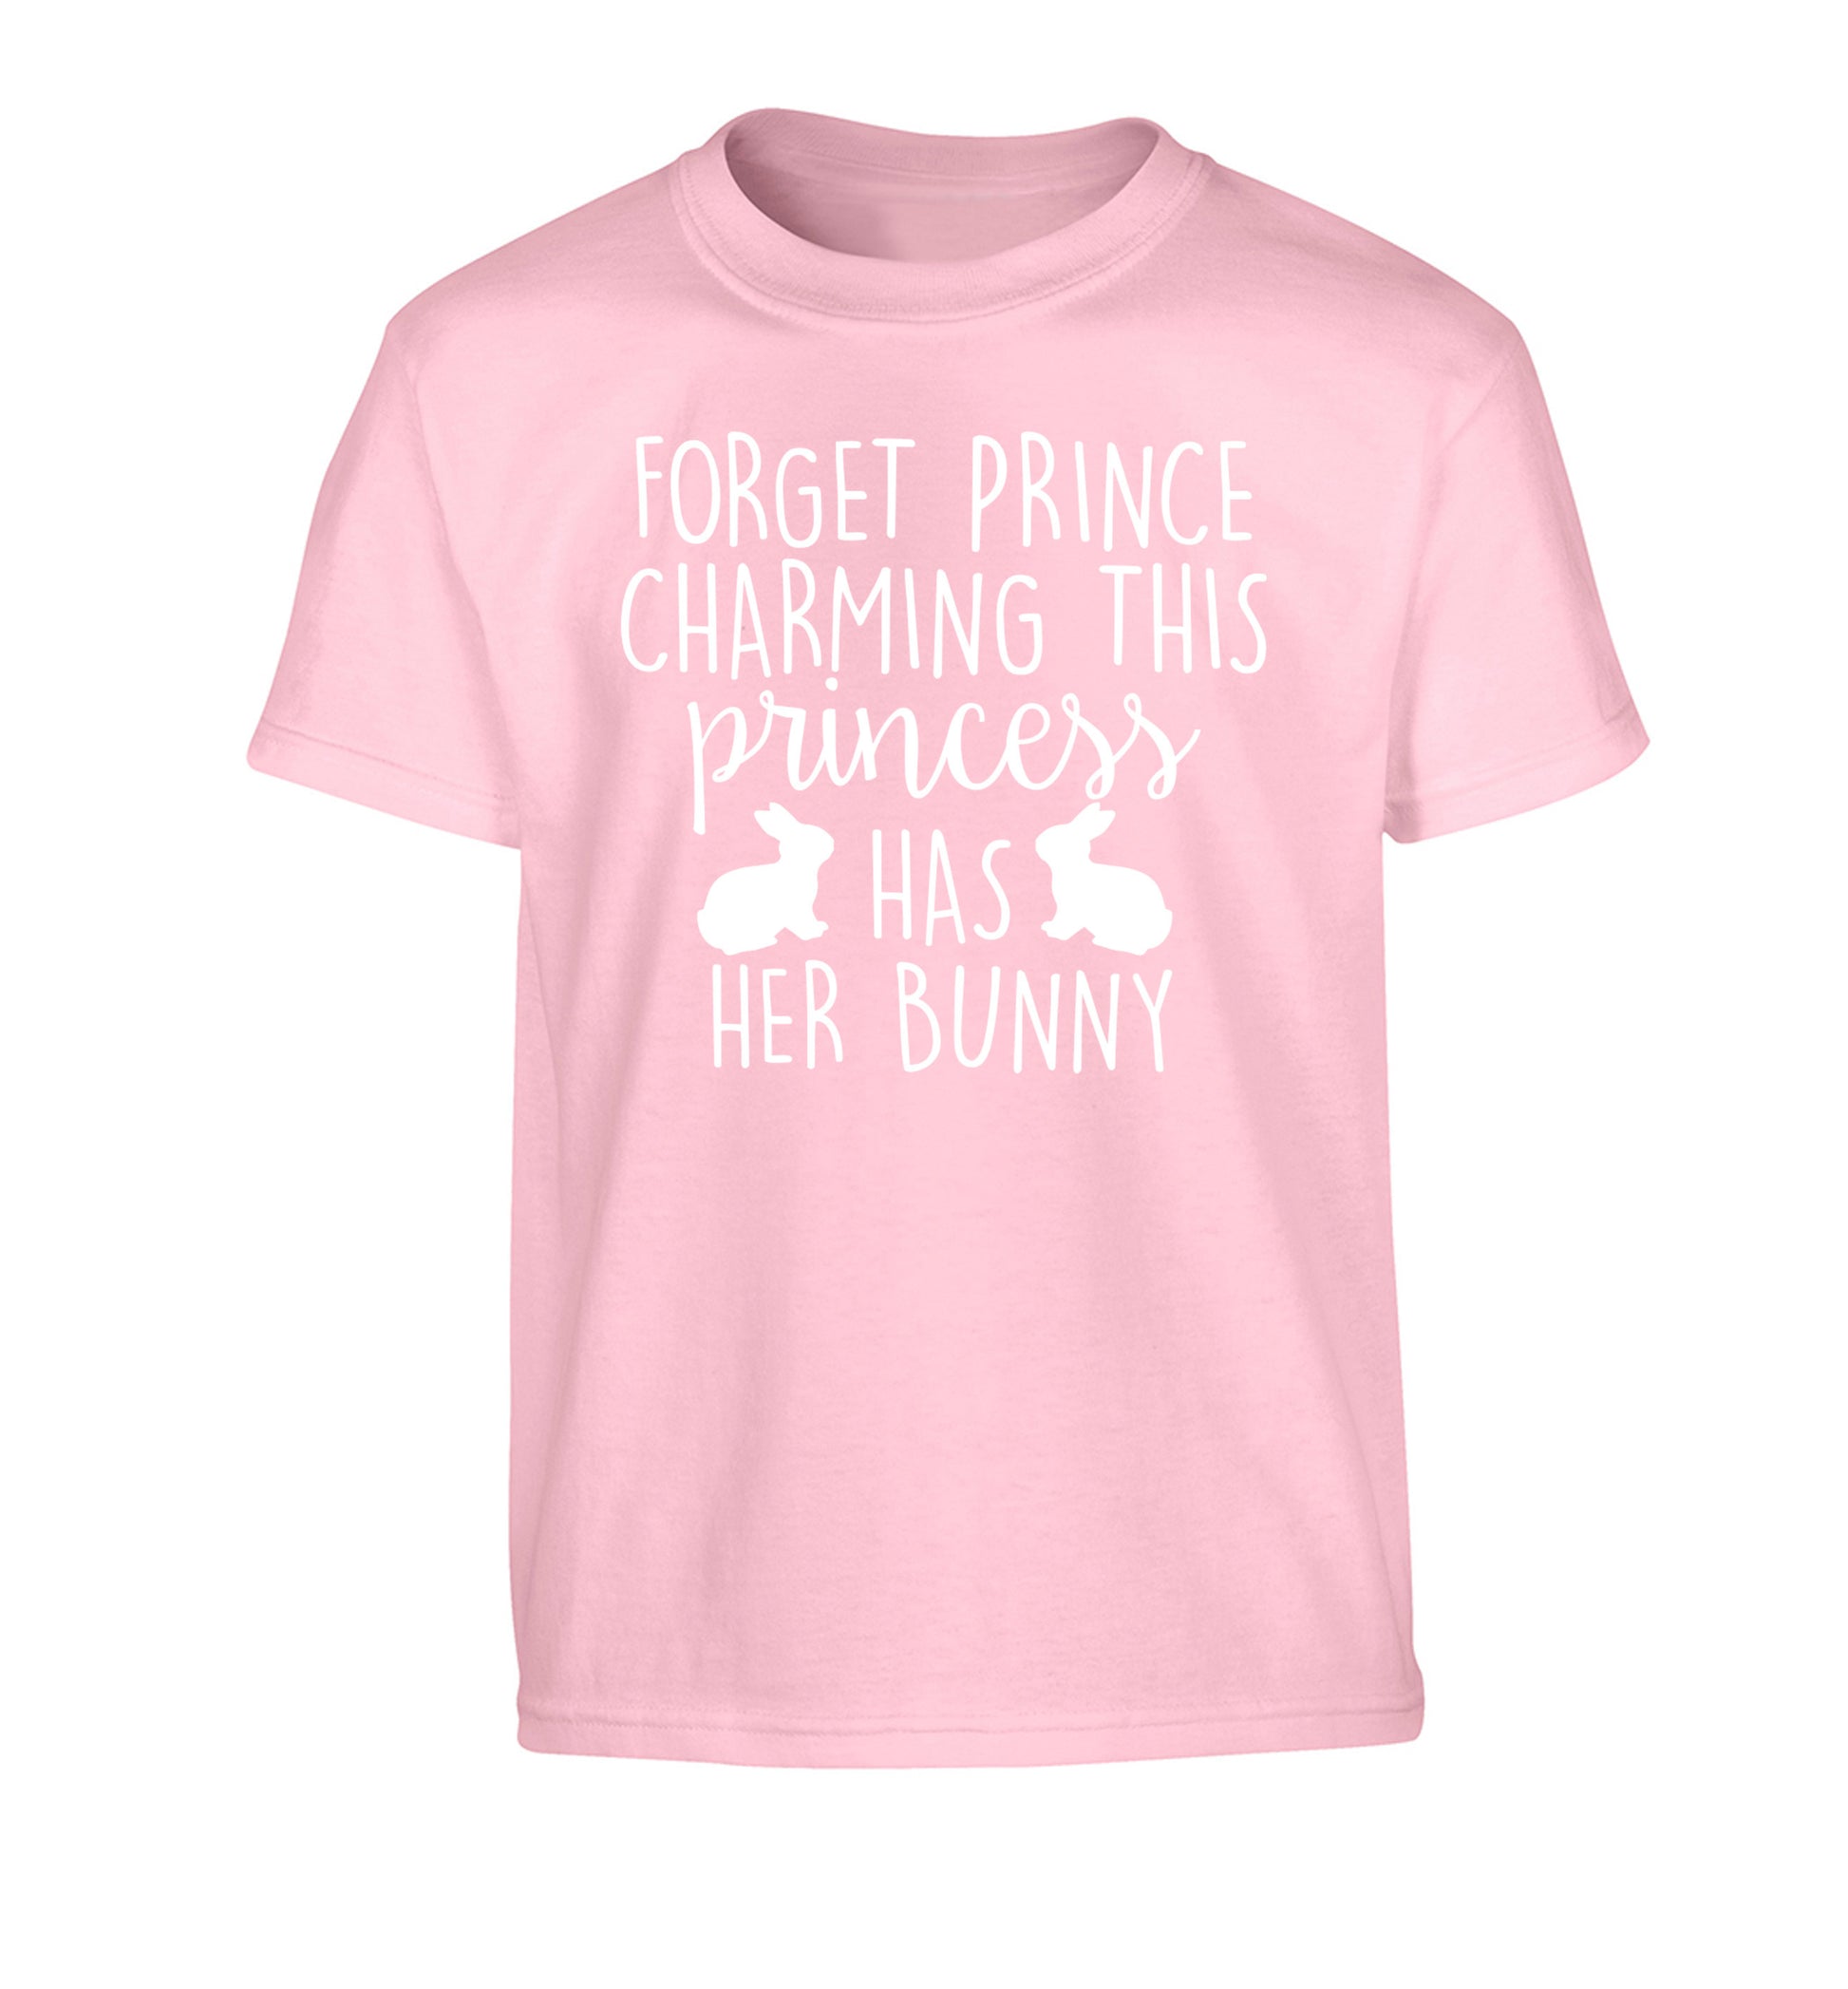 Forget prince charming this princess has her bunny Children's light pink Tshirt 12-14 Years